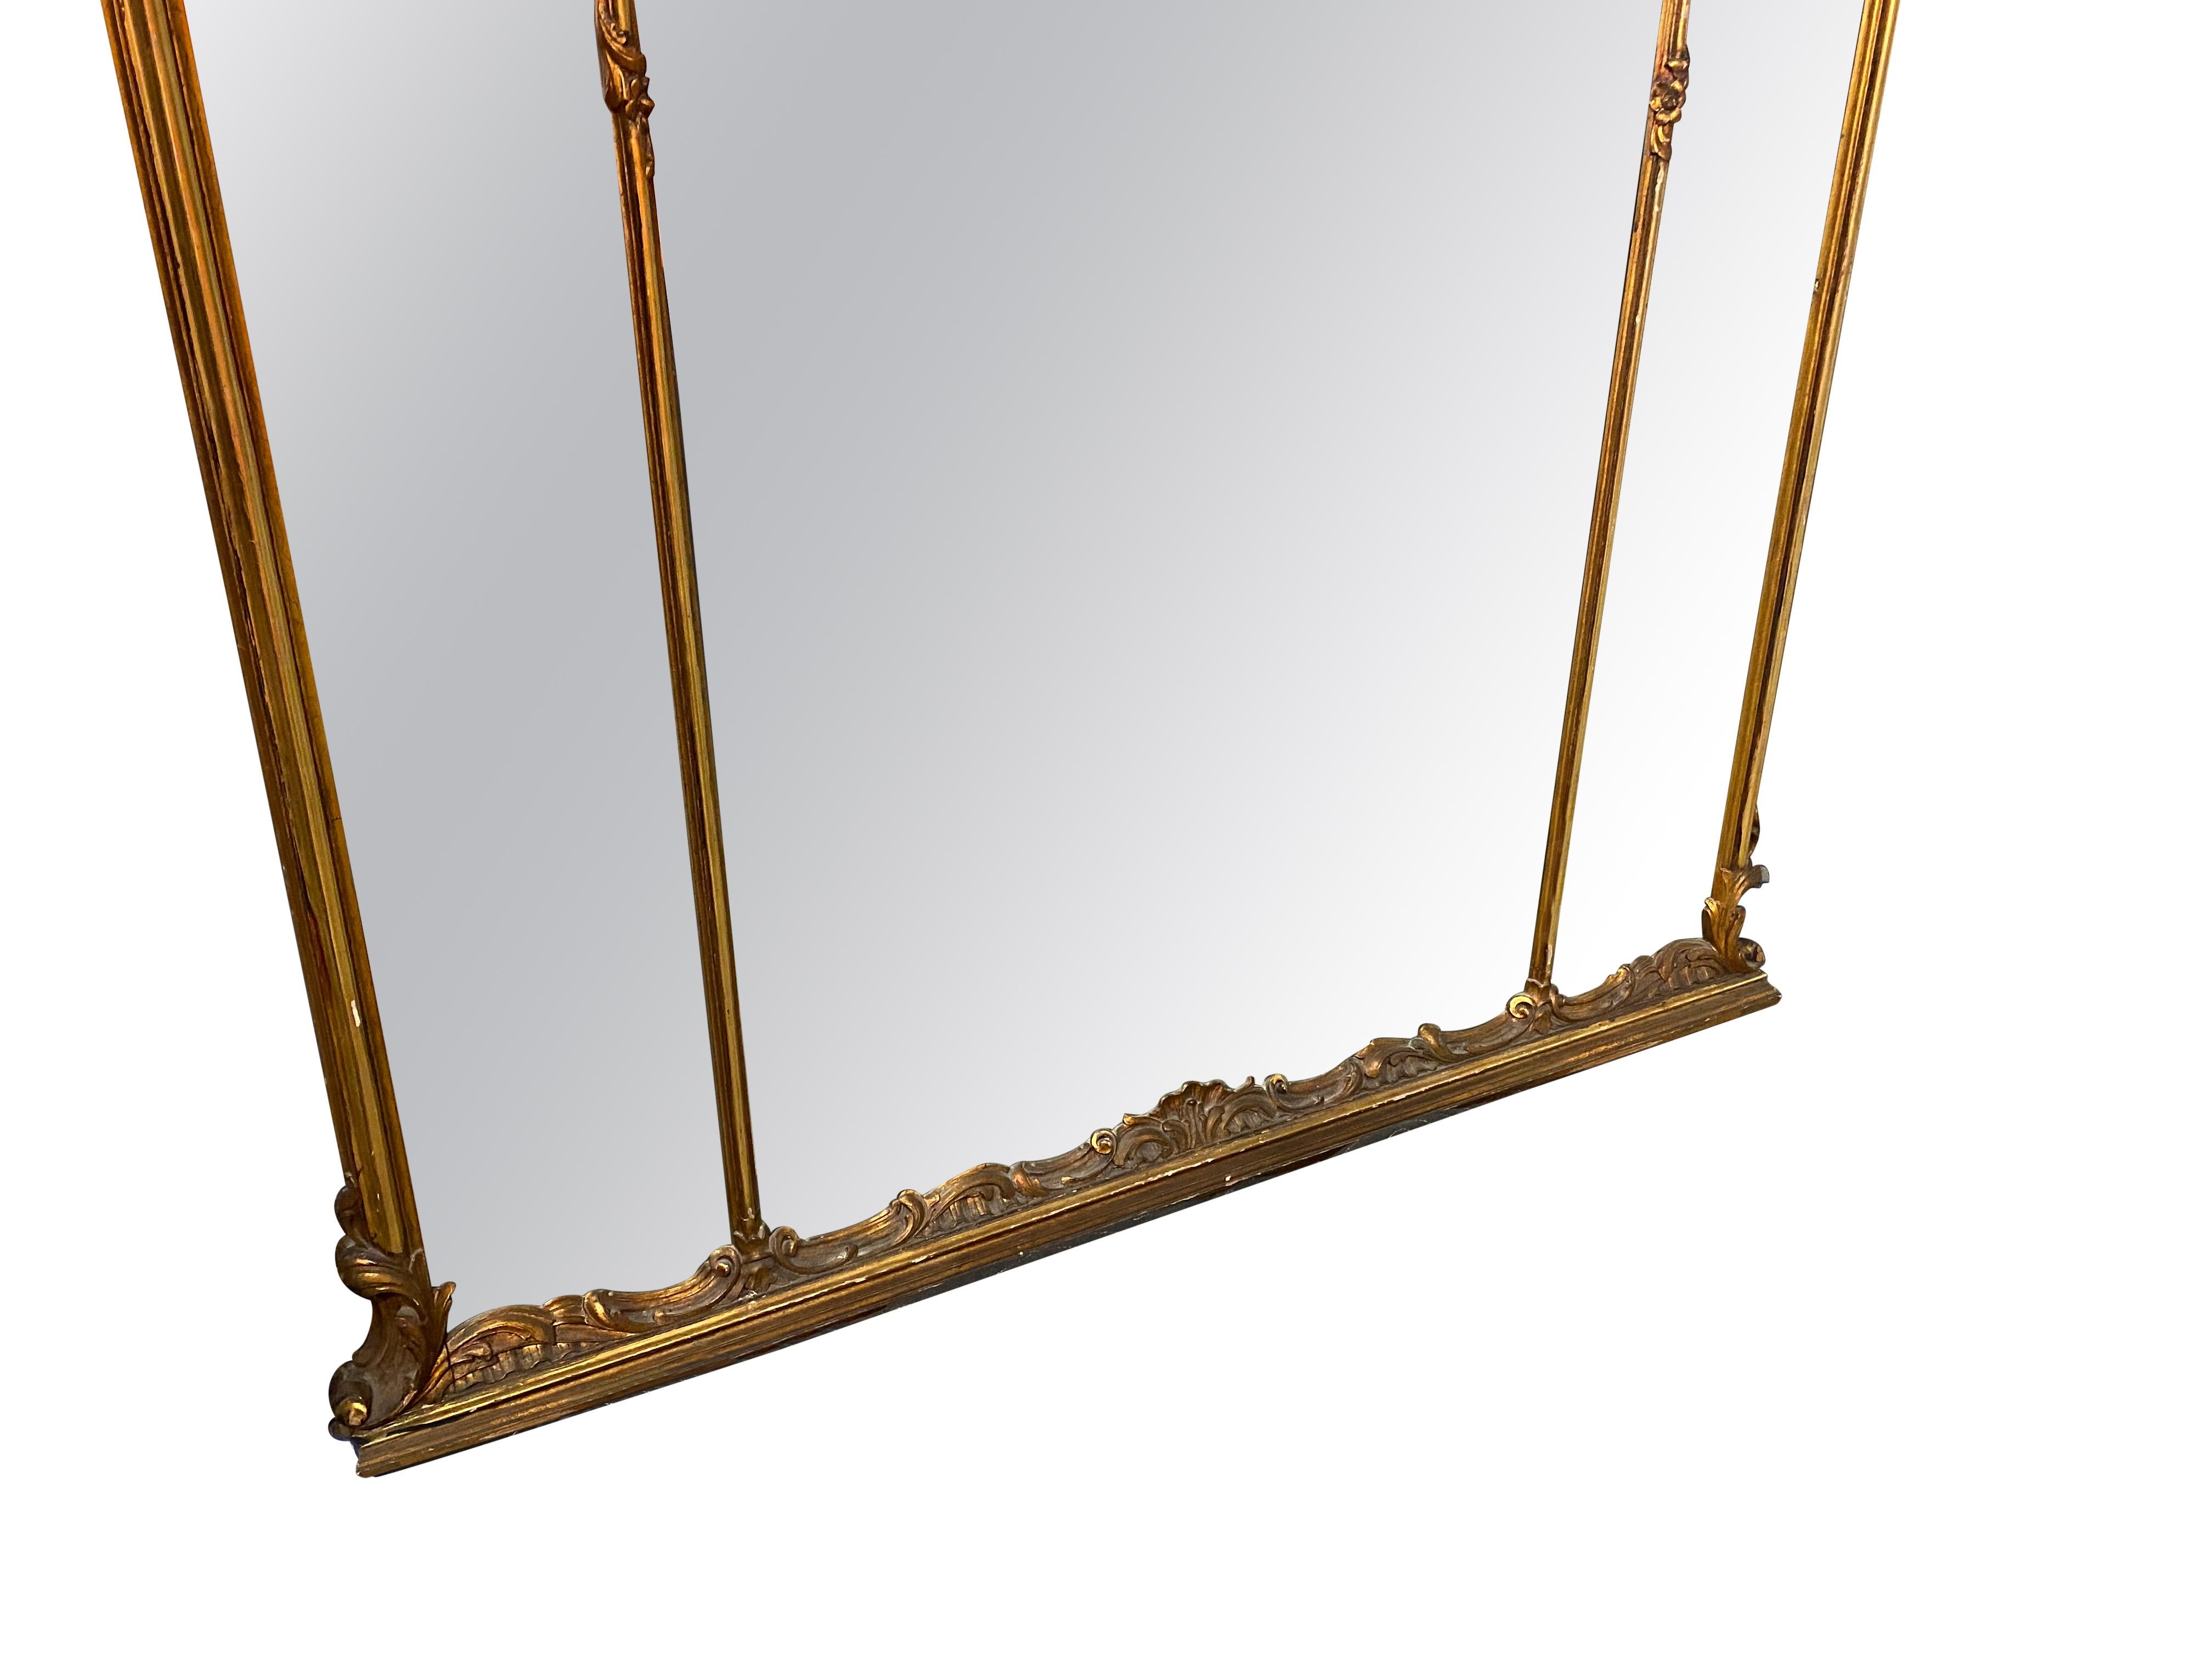 Antique, Decorative, Giltwood, Full Length Mirror  For Sale 2